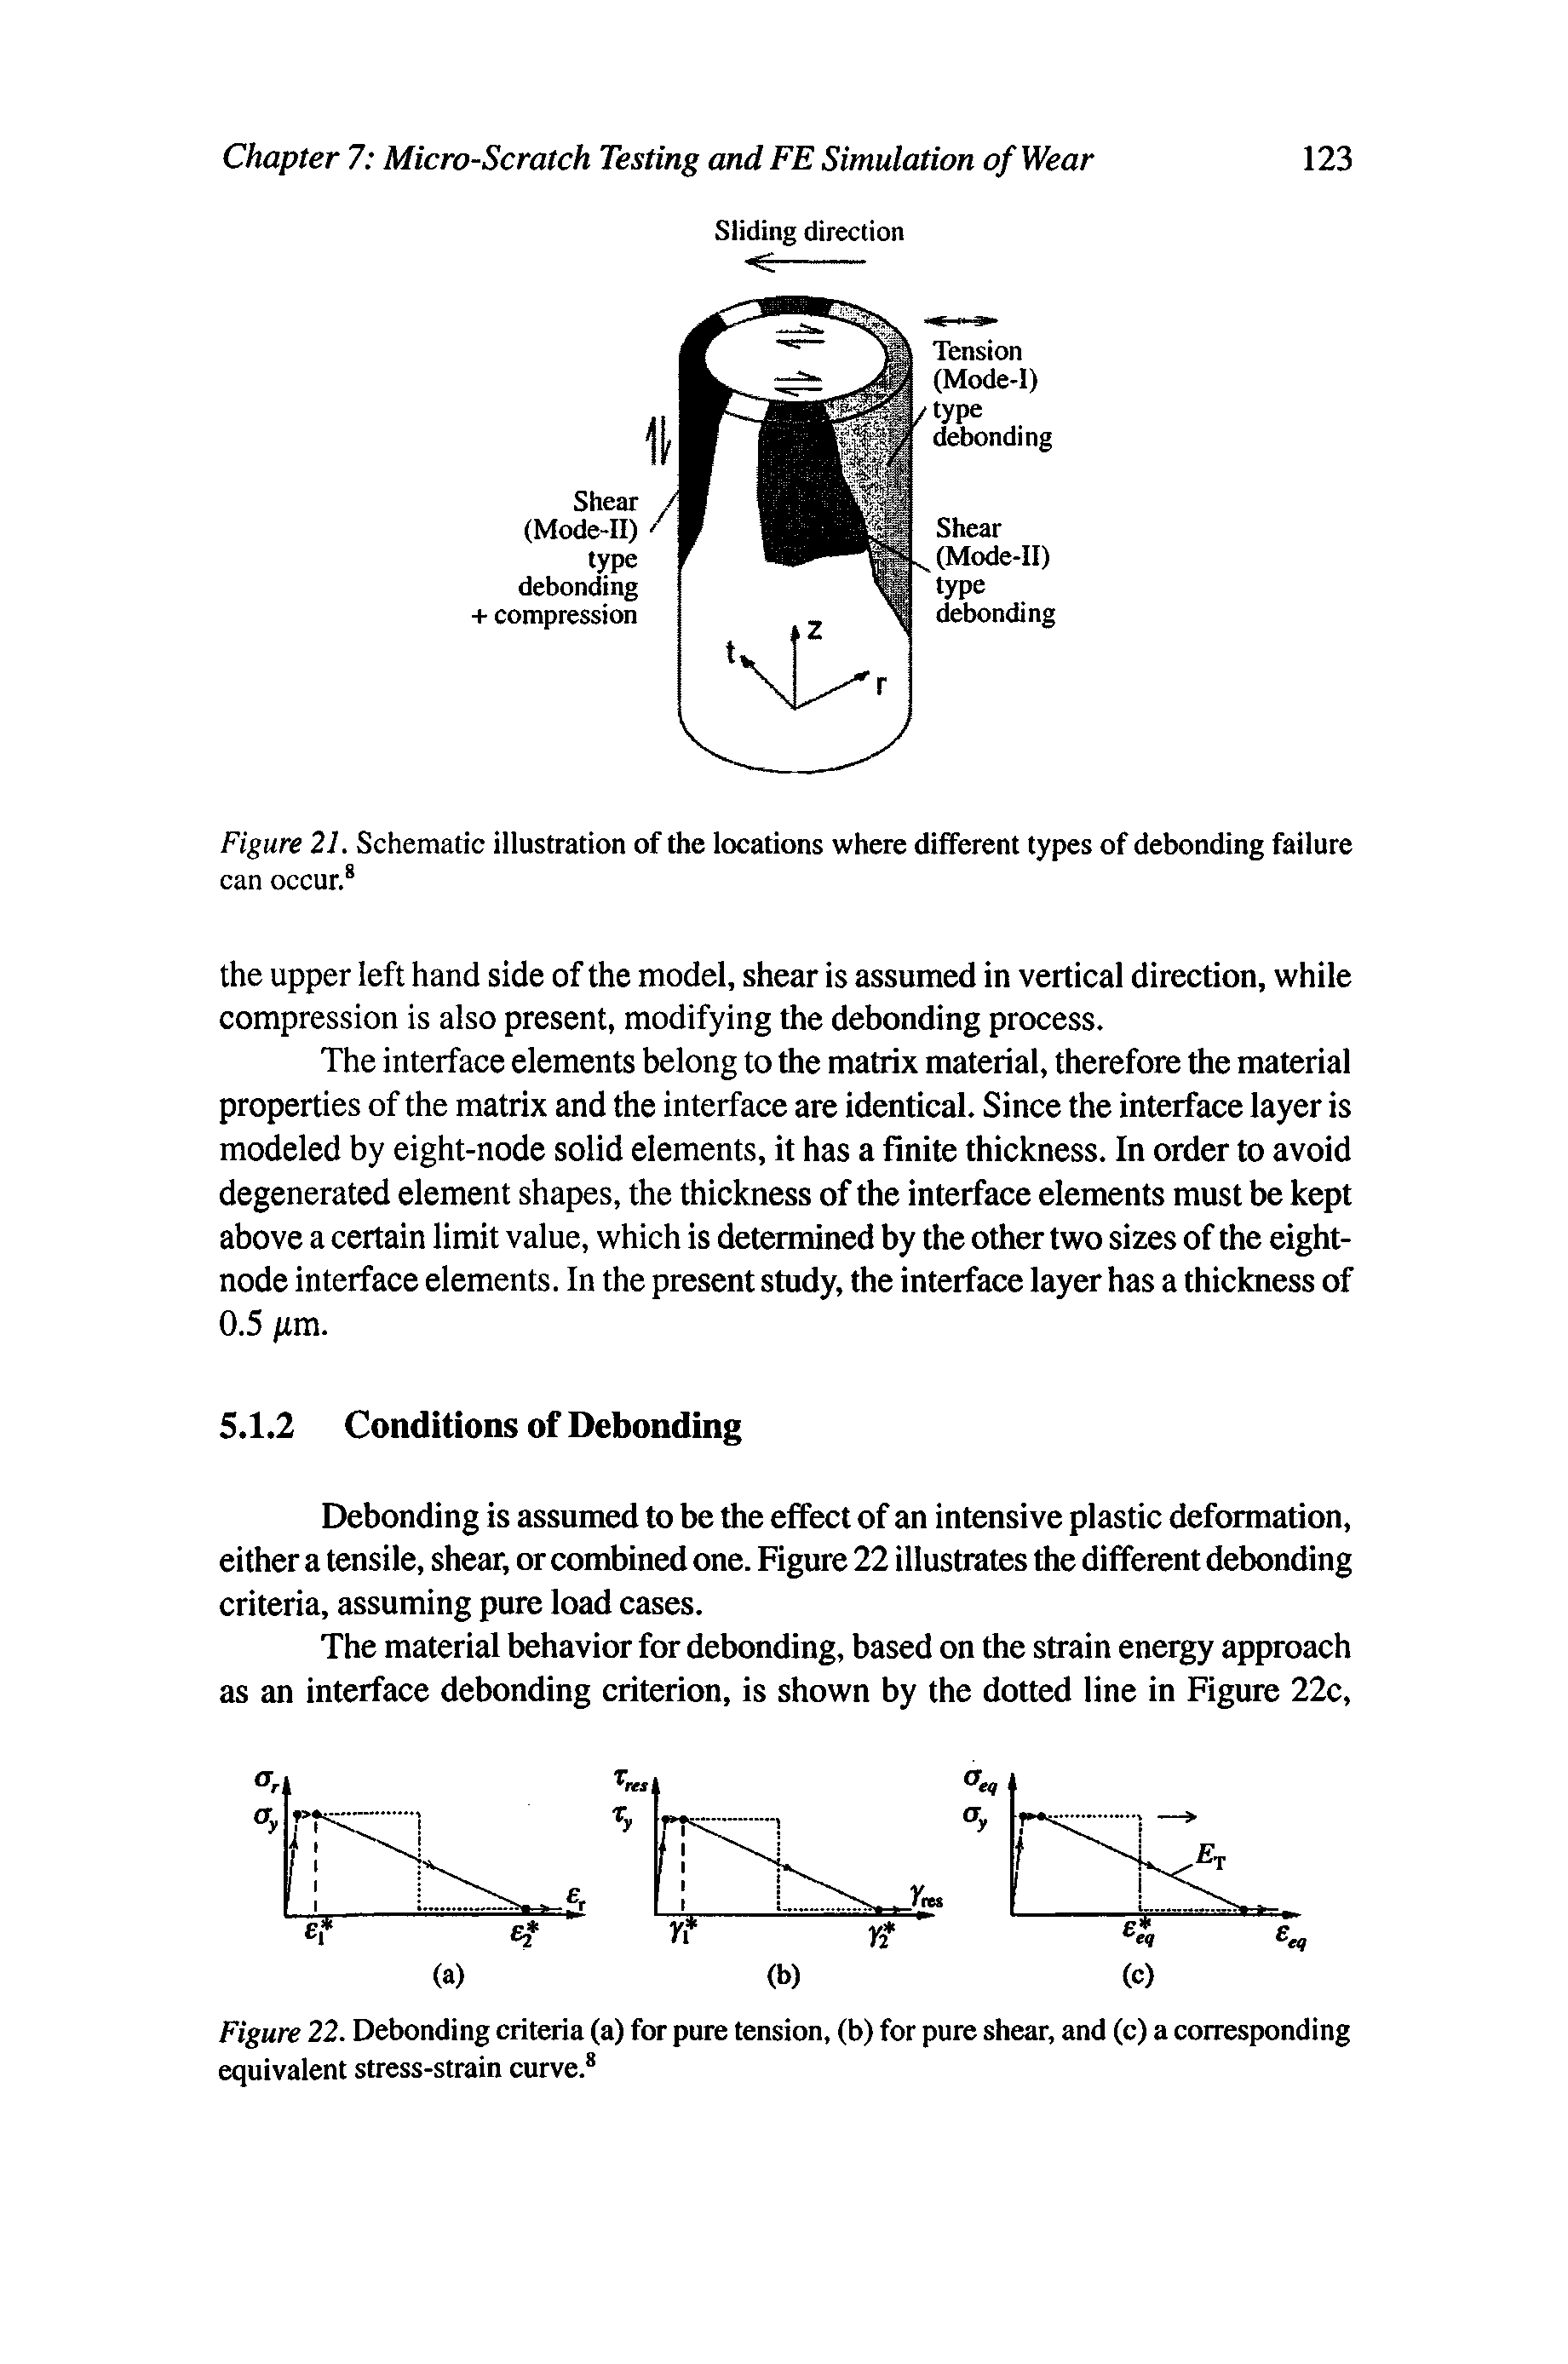 Figure 22. Debonding criteria (a) for pure tension, (b) for pure shear, and (c) a corresponding equivalent stress-strain curve. ...